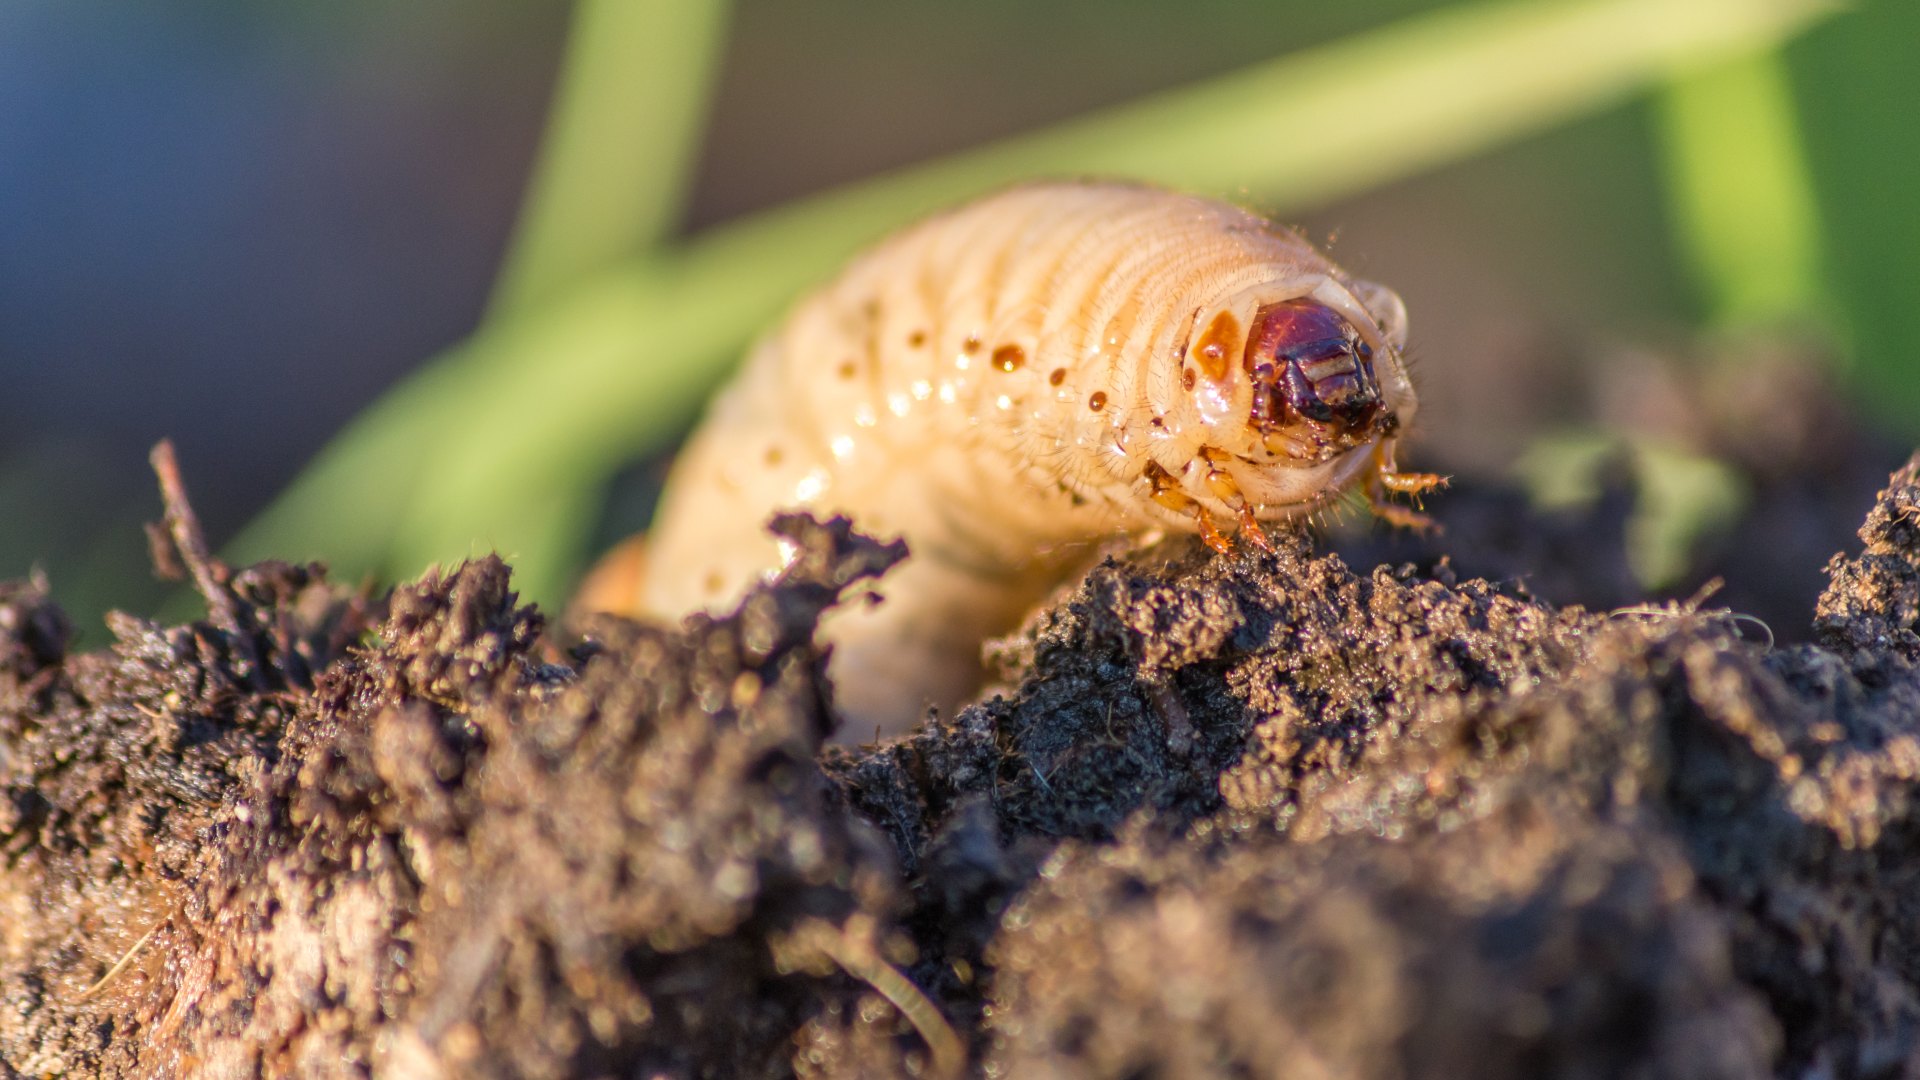 Got Grubs? Here Are the Most Common Signs of a Lawn Grub Infestation